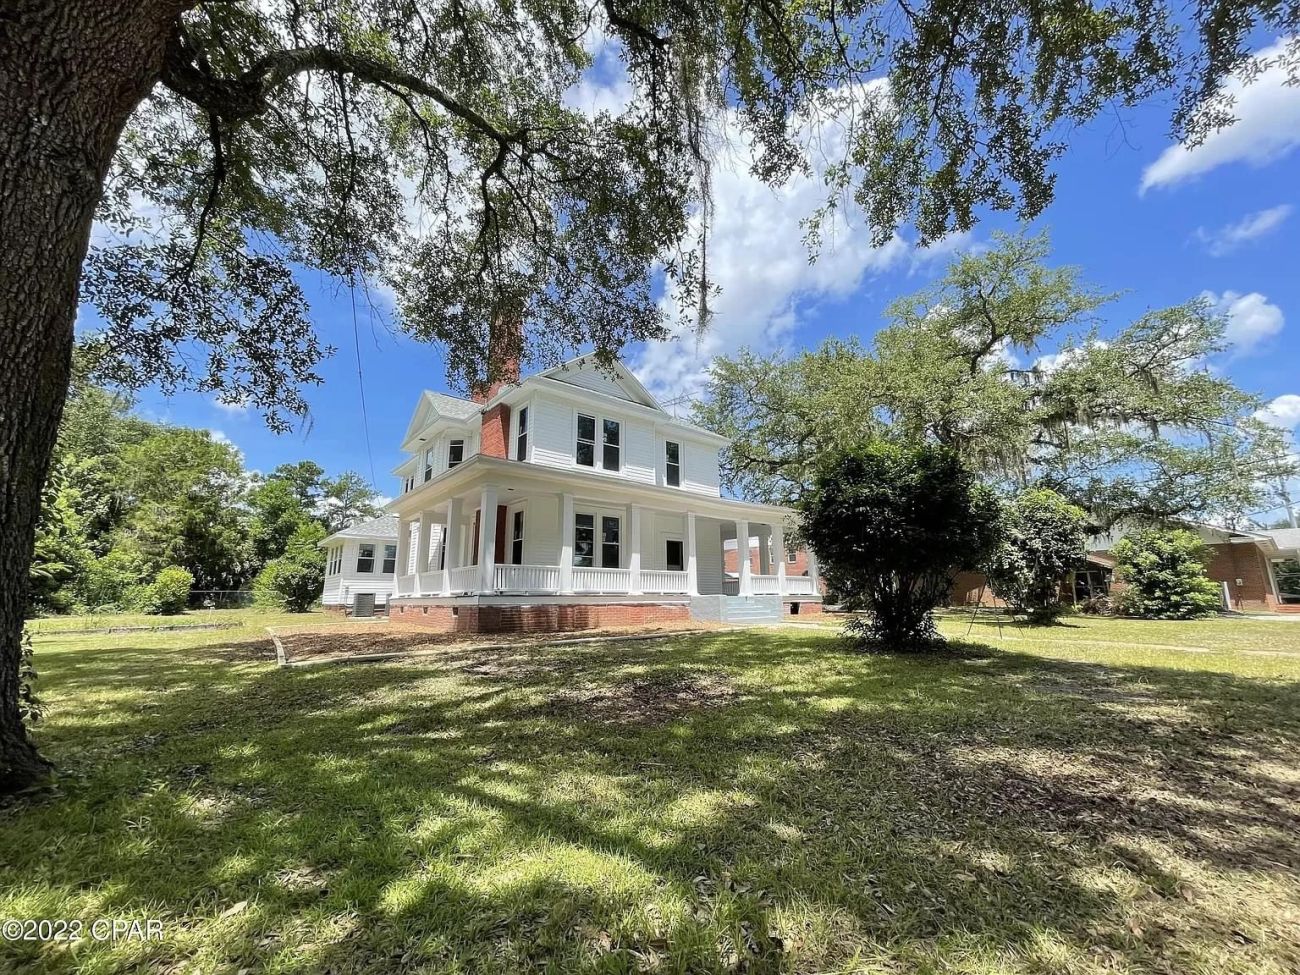 1914 Historic House For Sale In Chattahoochee Florida